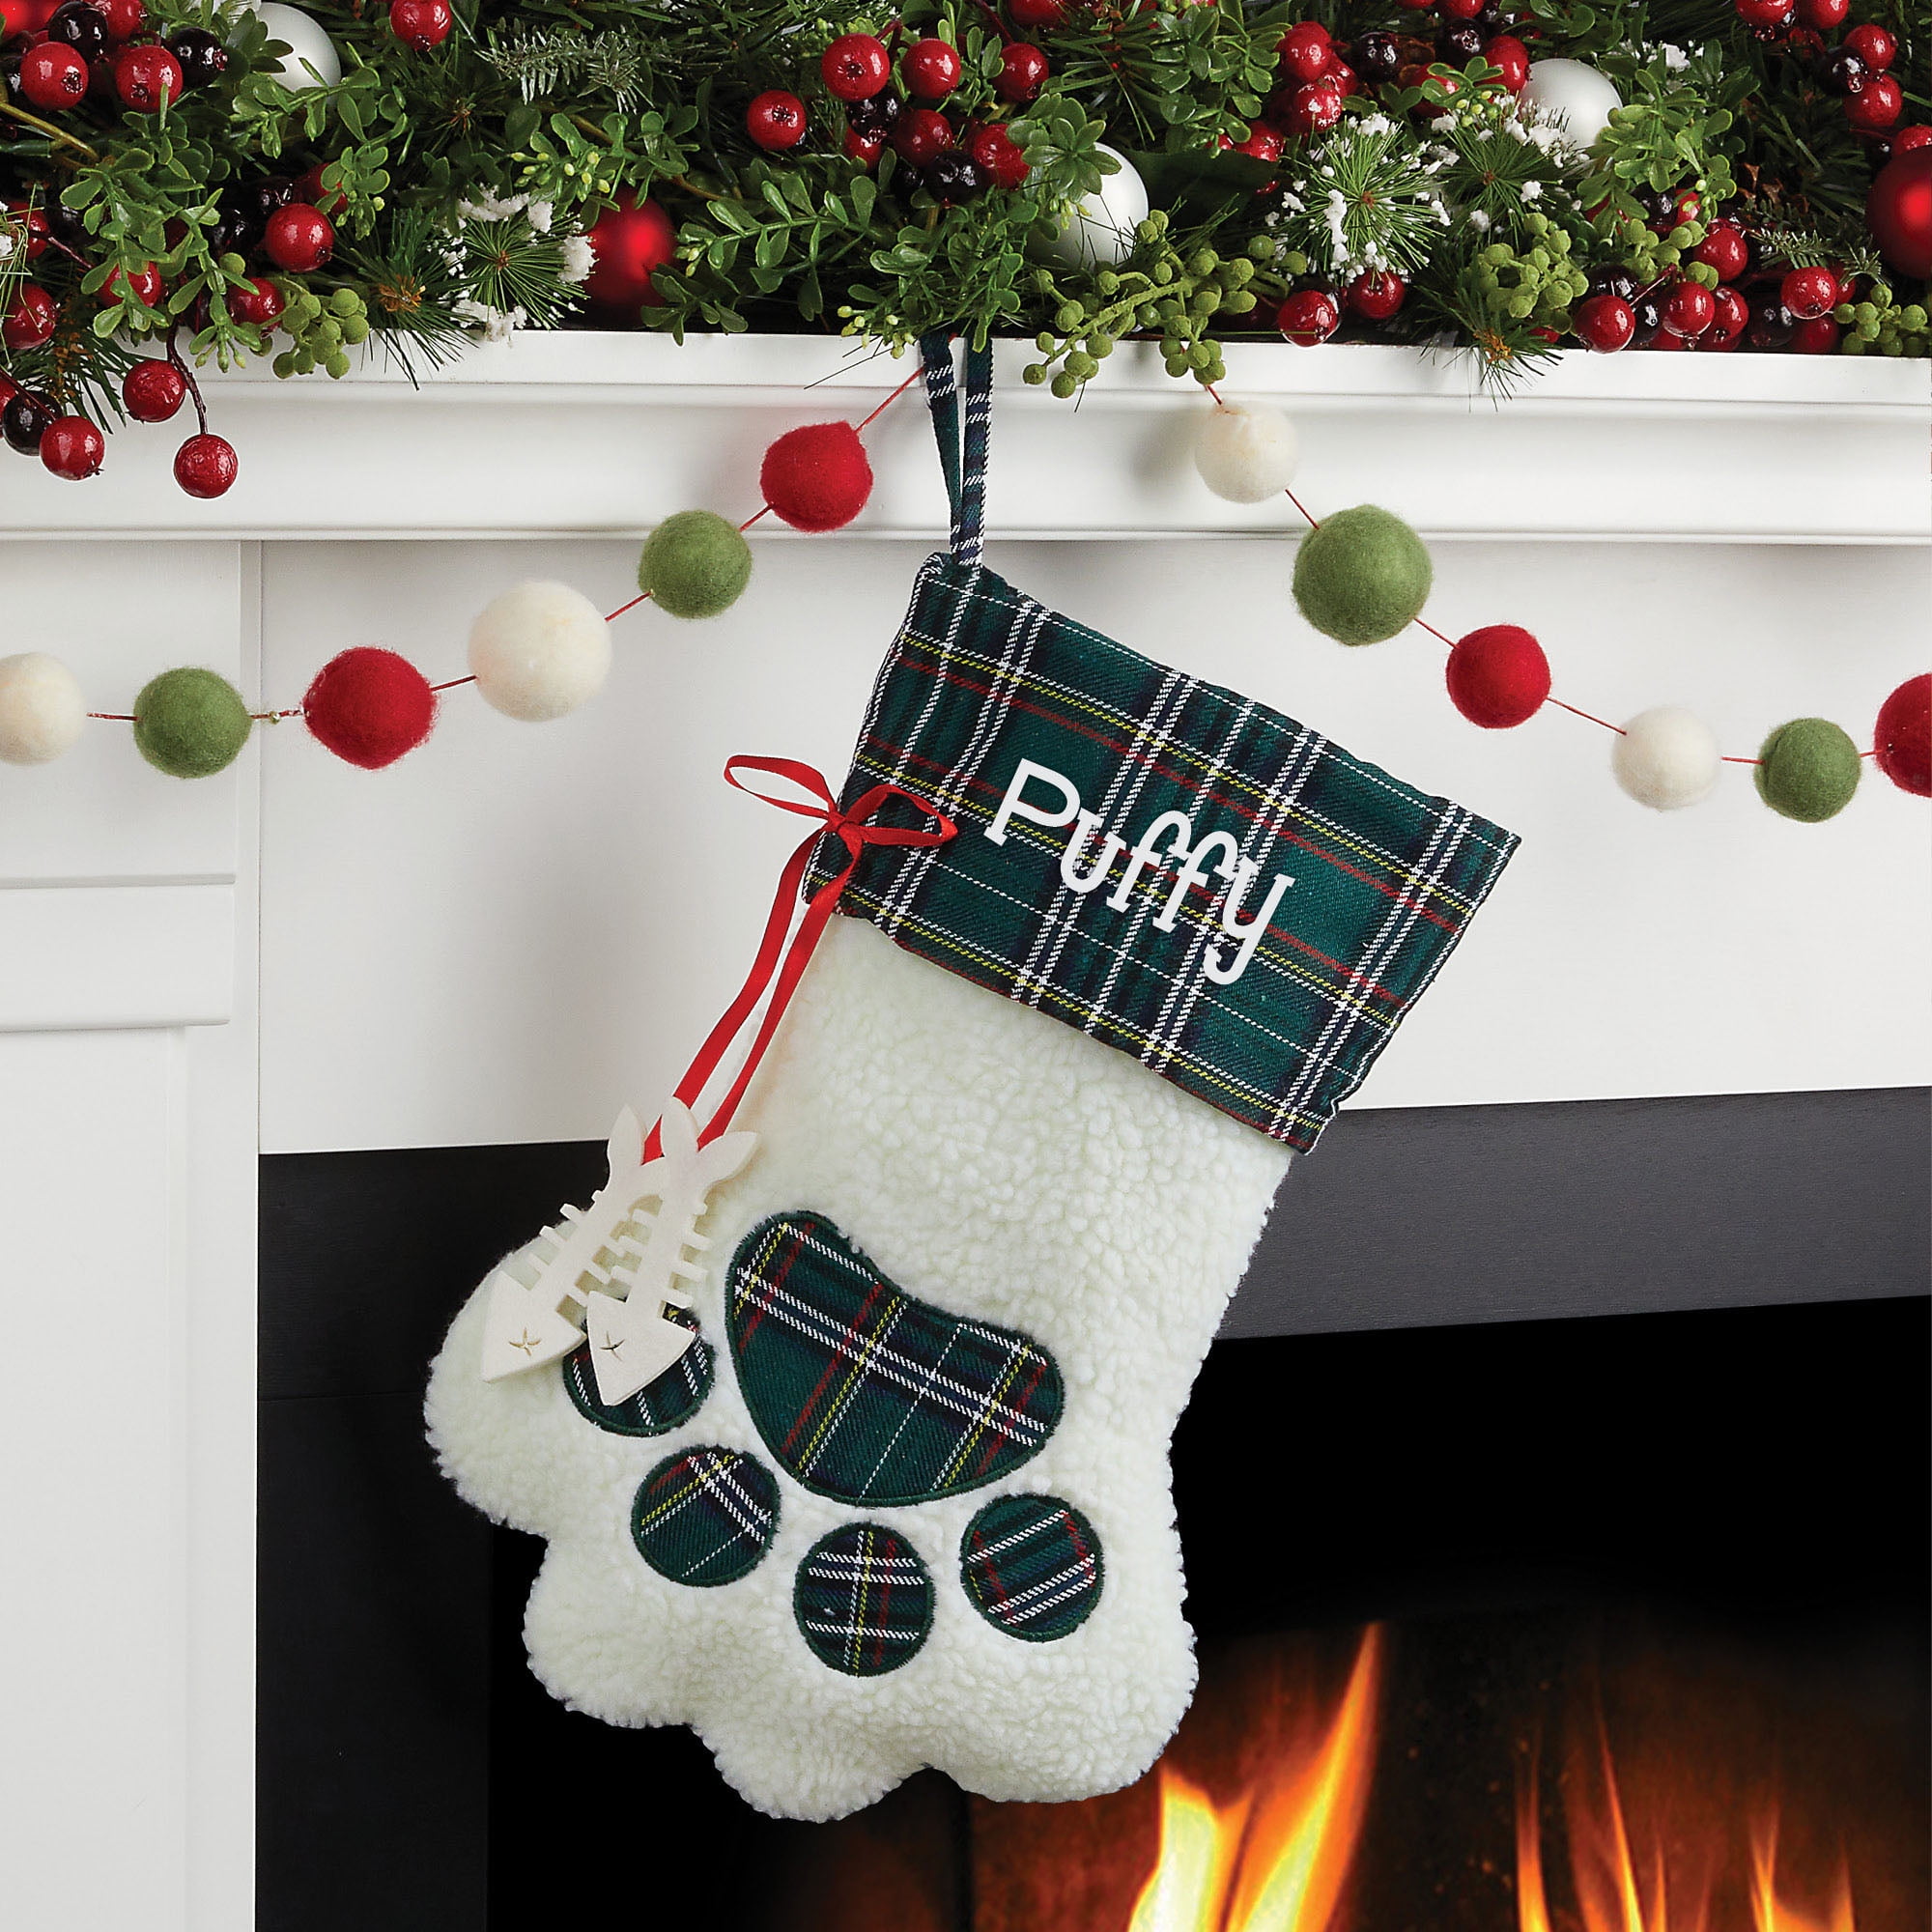 ewwercd Cat Personalized Knitted Christmas Stocking with Name, Embroidery Christmas Trees Snowflake Paw Custom Needlepoint Stockings Set,Customized Family